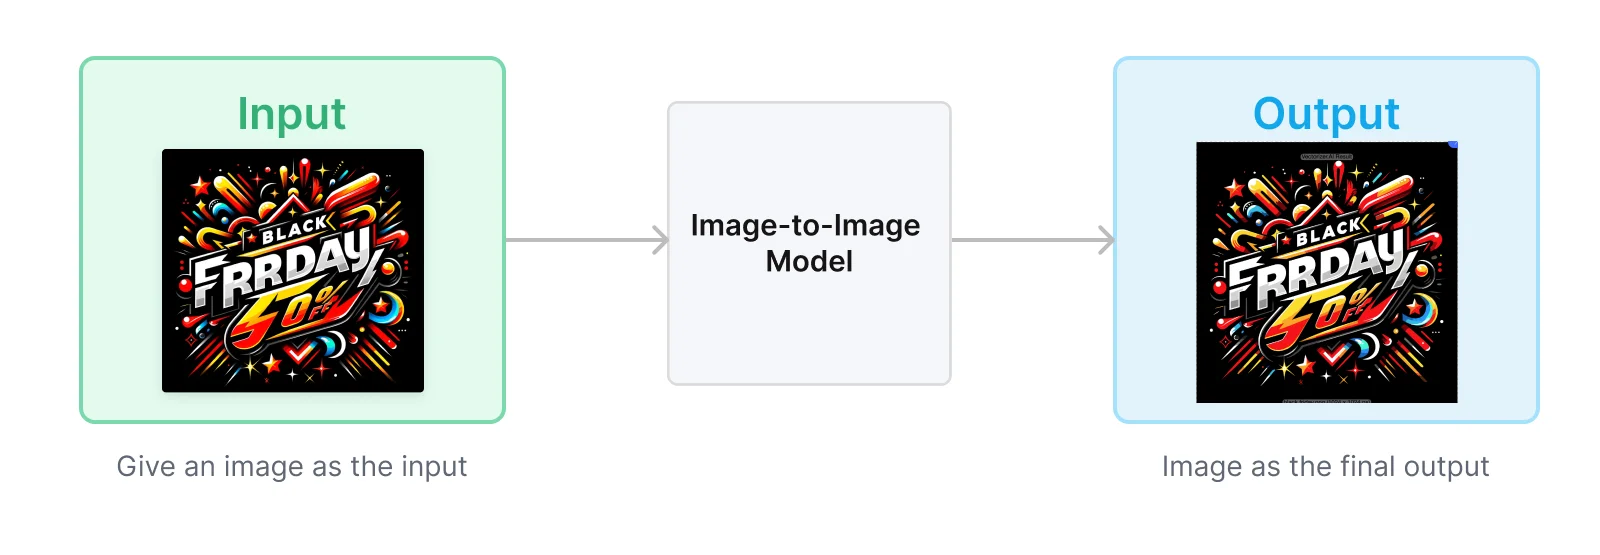 image to image model example